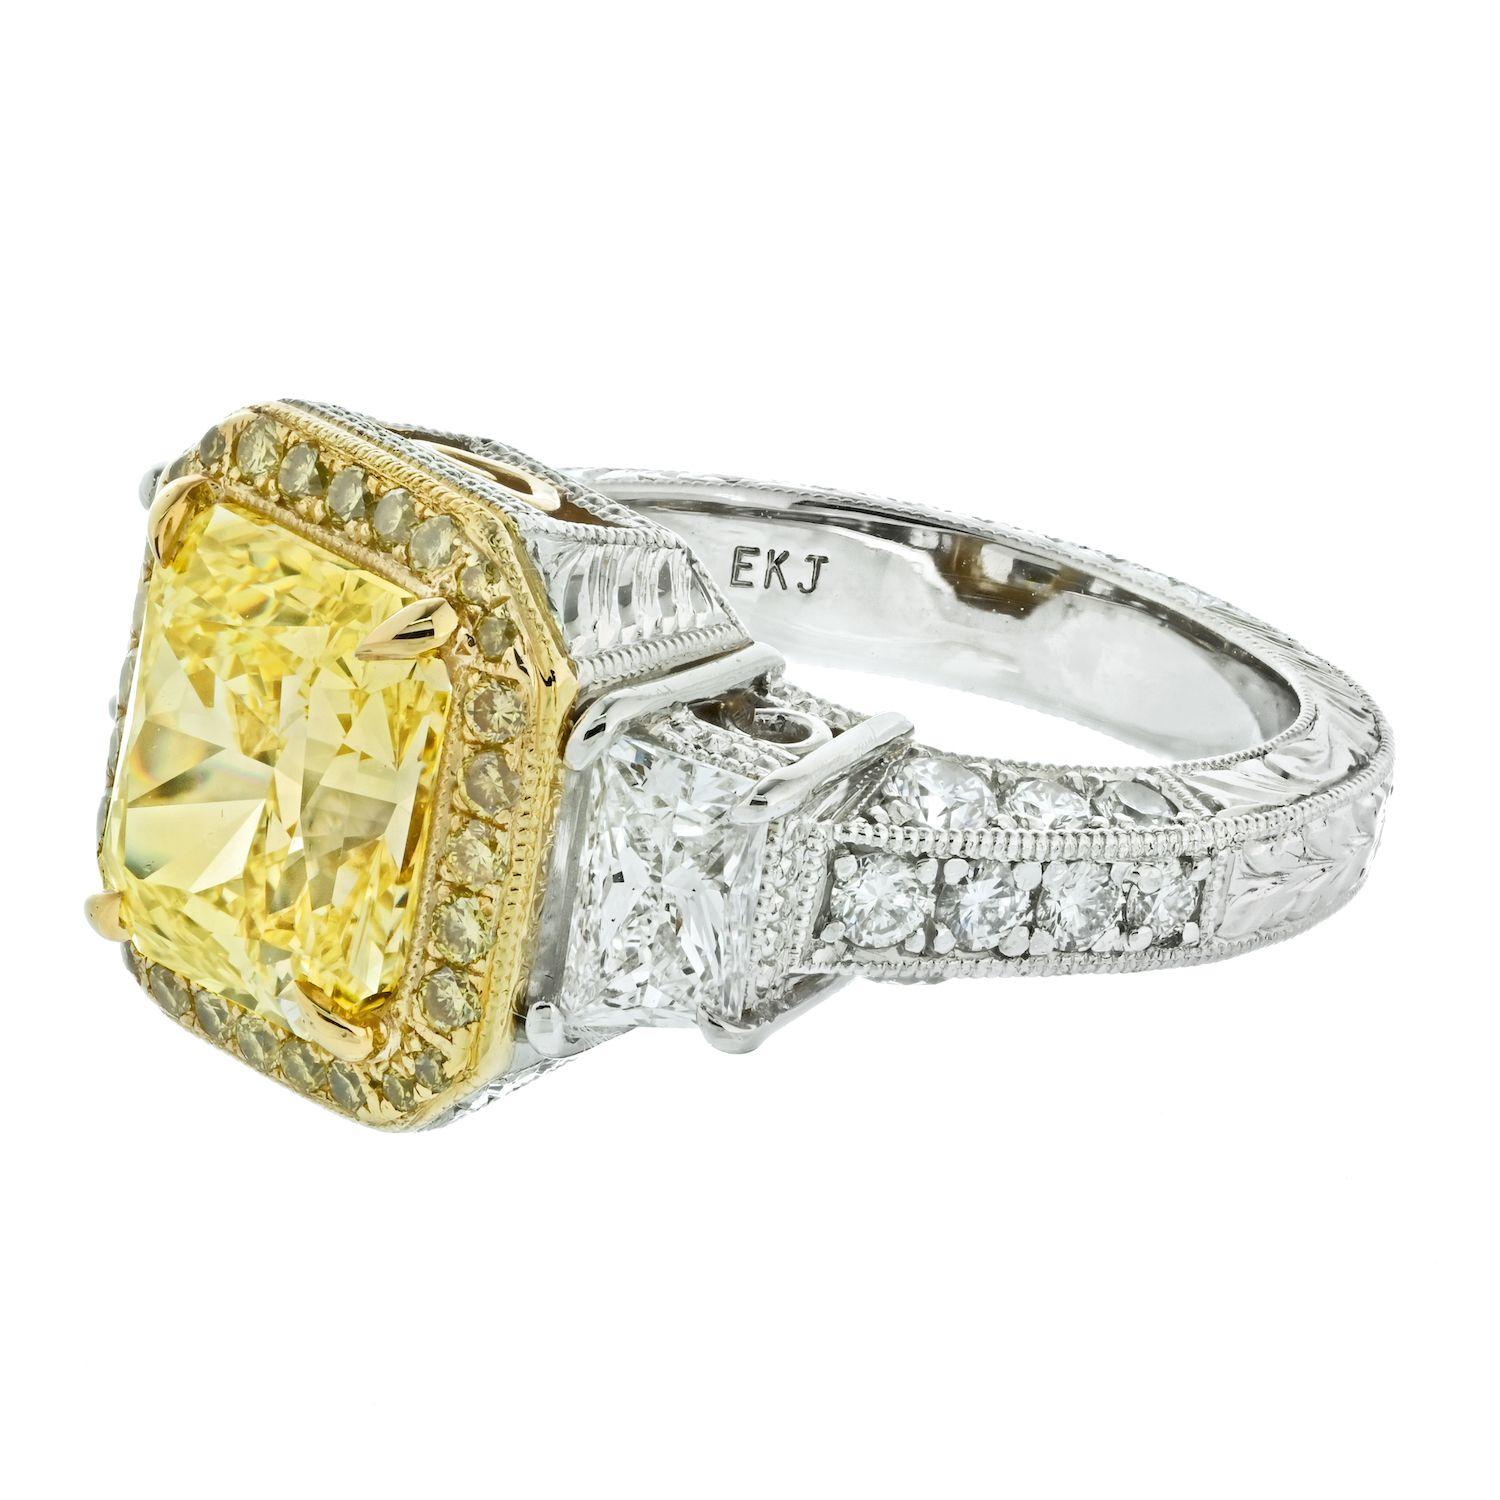 3 Carat Radiant Cut Fancy Intense Yellow Diamond Engagement Ring.

Beautiful diamond engagement ring newly crafted in a vintage style. Mounted with a 3.06ct Radiant cut diamond that is GIA certified fancy yellow intense color and IF (flawless)